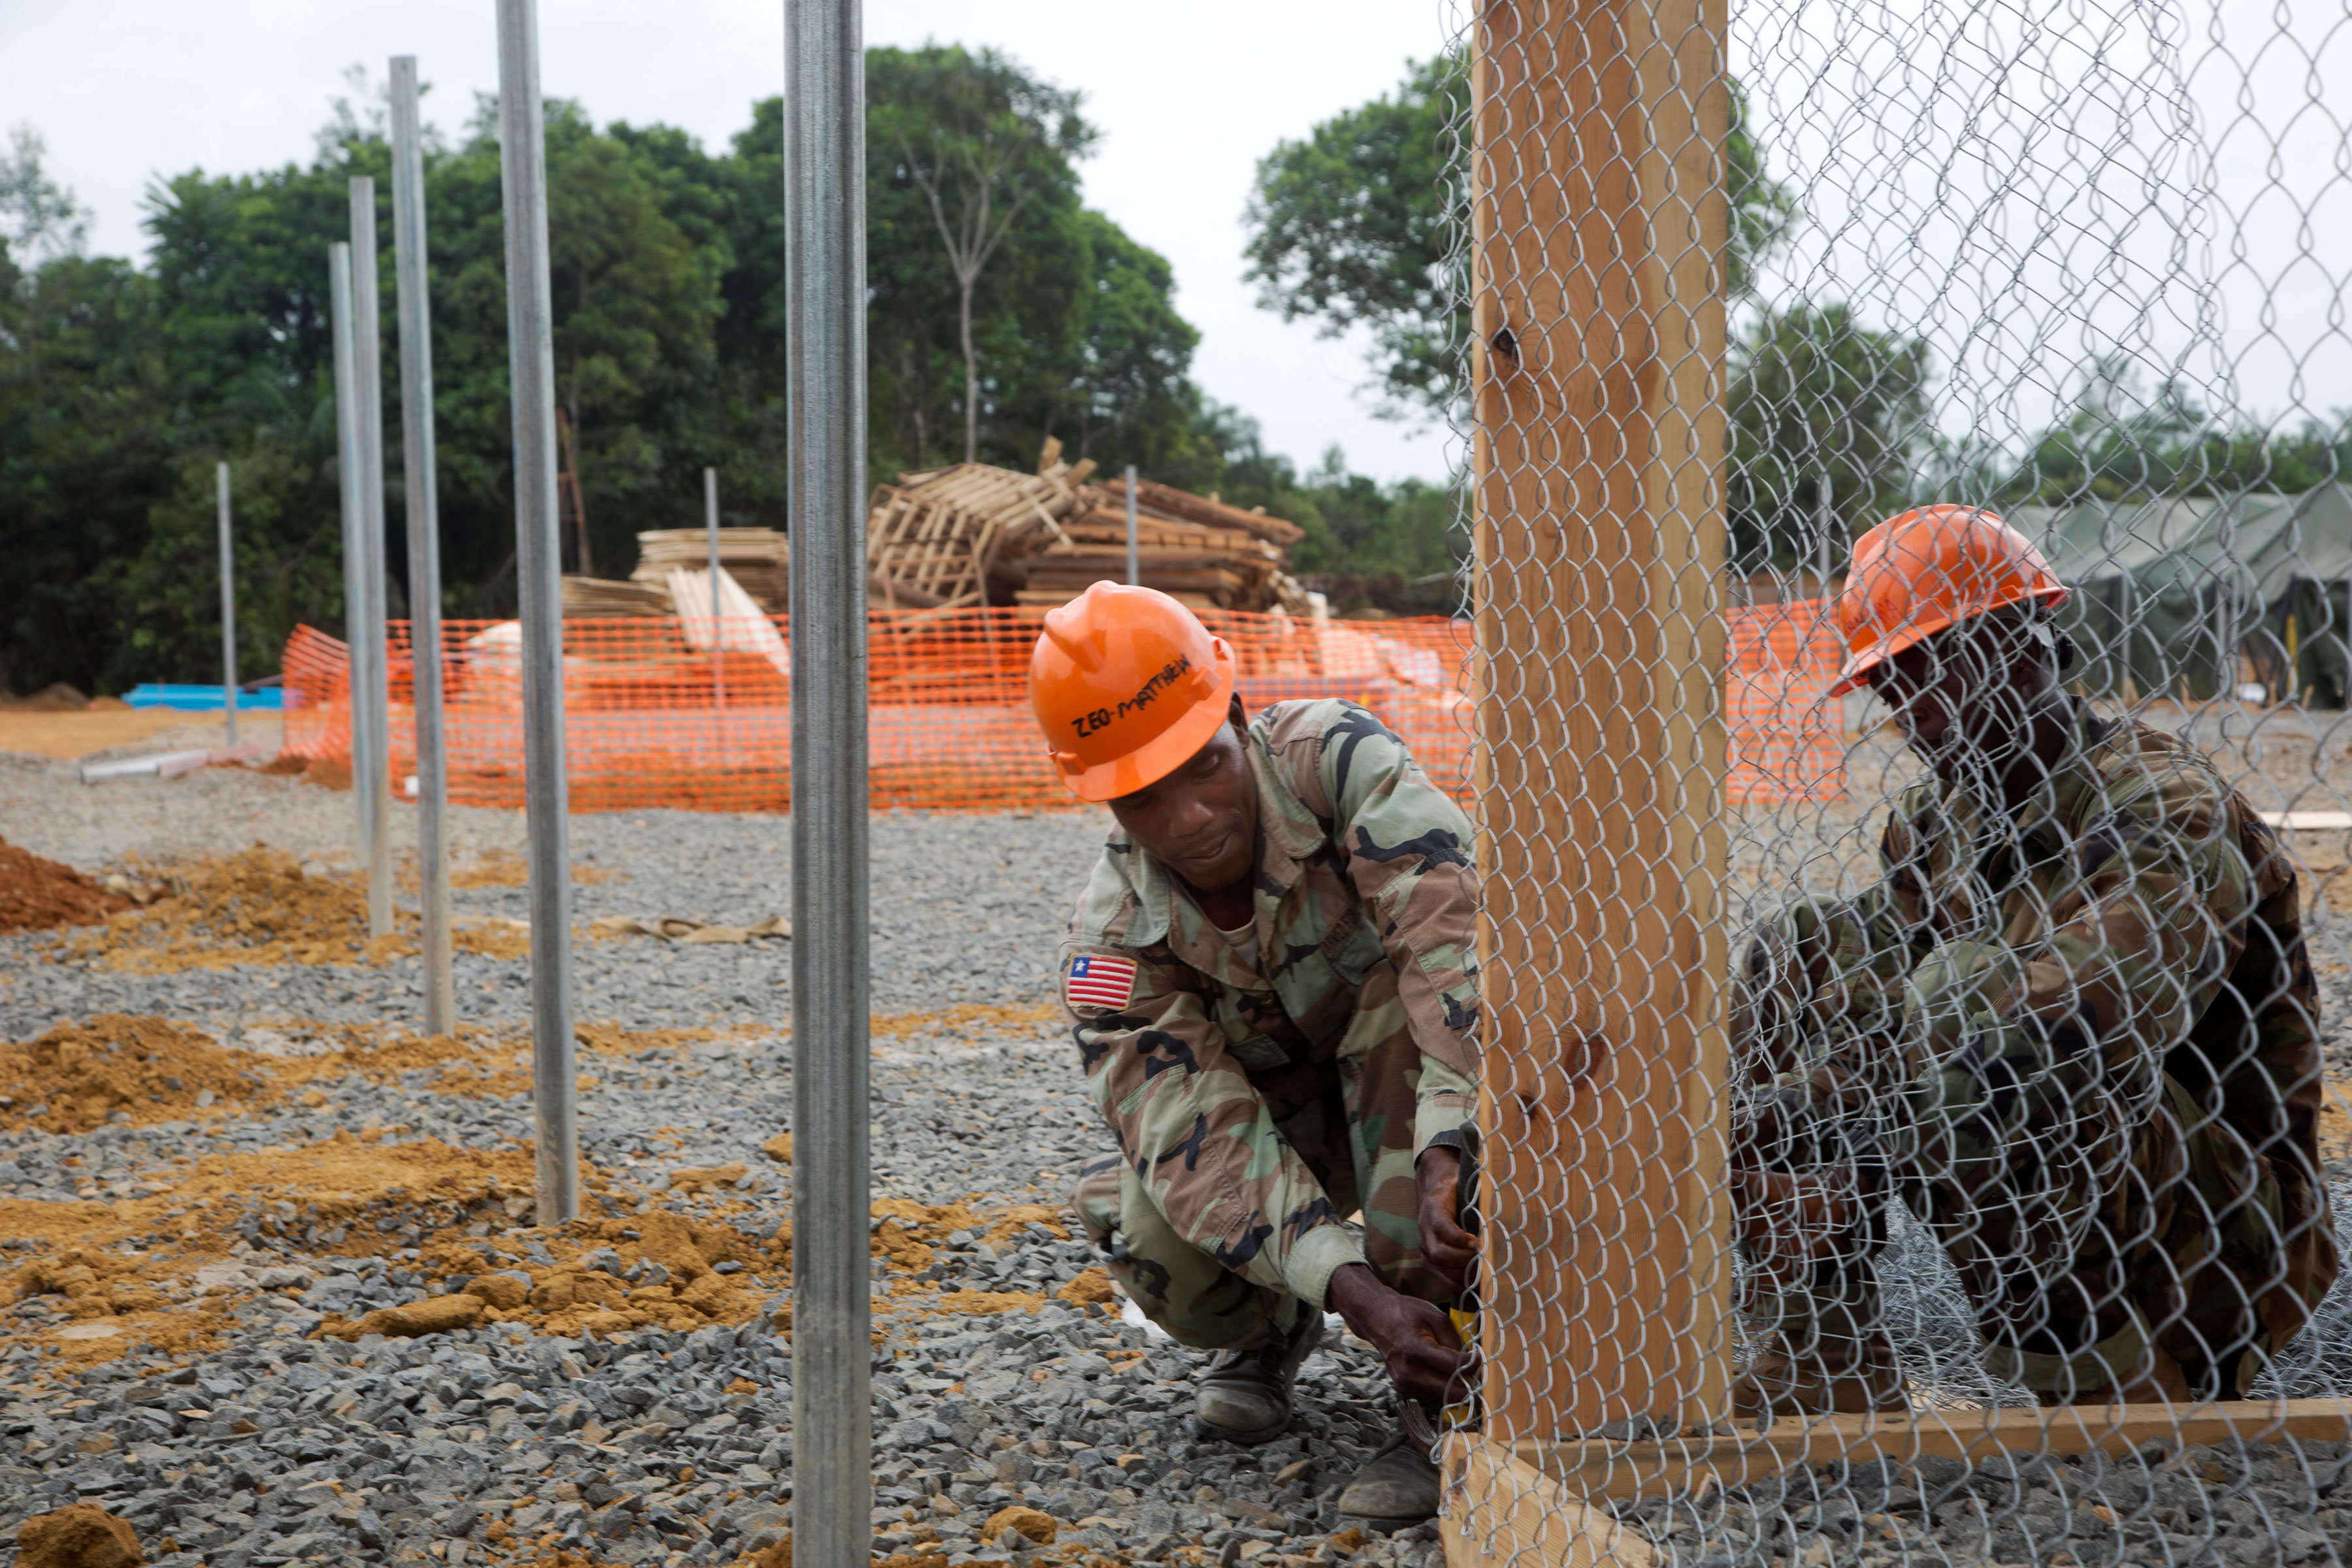 Liberian Soldiers attach fencing at an Ebola treatment unit being built in support of Operation United Assistance in Gbediah, Liberia, in December 2014. United Assistance was the DOD operation to provide command and control, logistics, training and engineering support to U.S. Agency for International Development-led efforts to contain the Ebola virus outbreak in West Africa. (U.S. Army photo by Sgt. 1st Class Brien Vorhees, 55th Signal Company (Combat Camera))